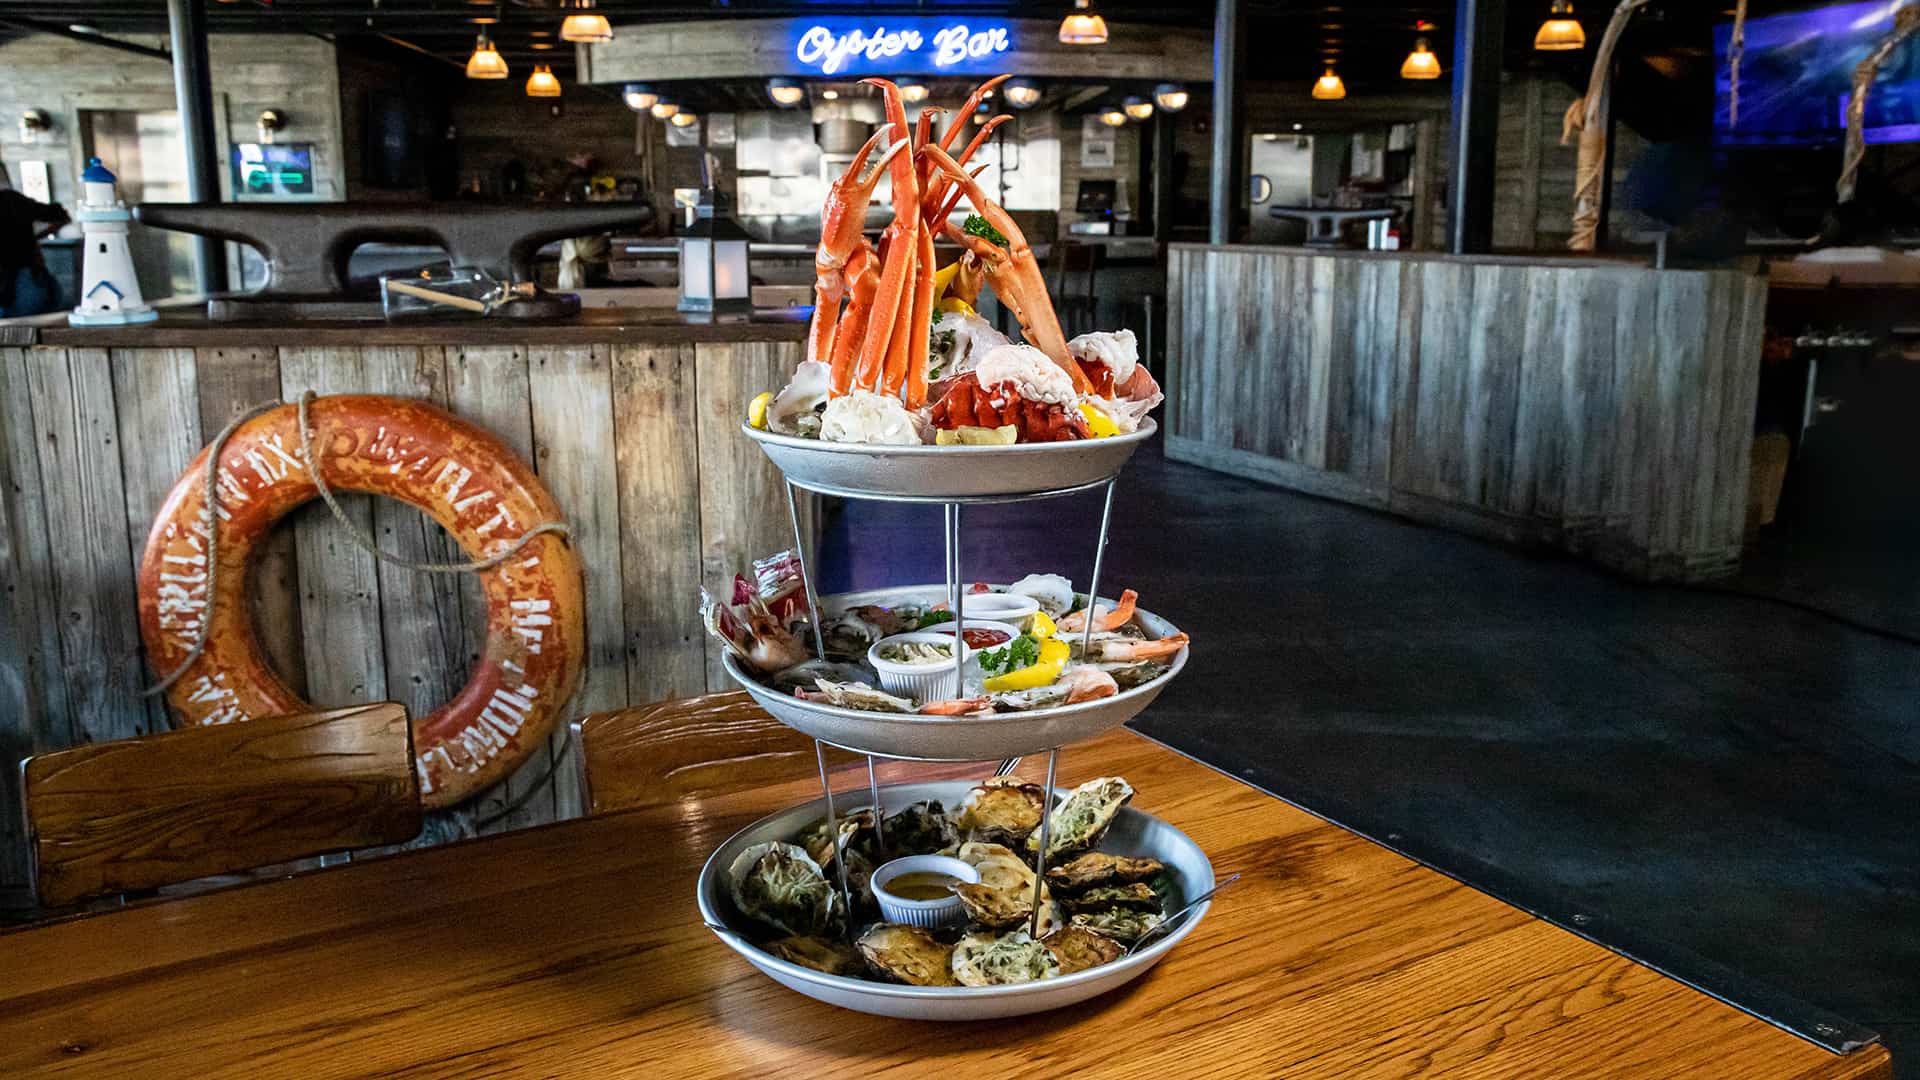 Three-tier seafood tower at The Wharf featuring oysters, crab legs, and scallops